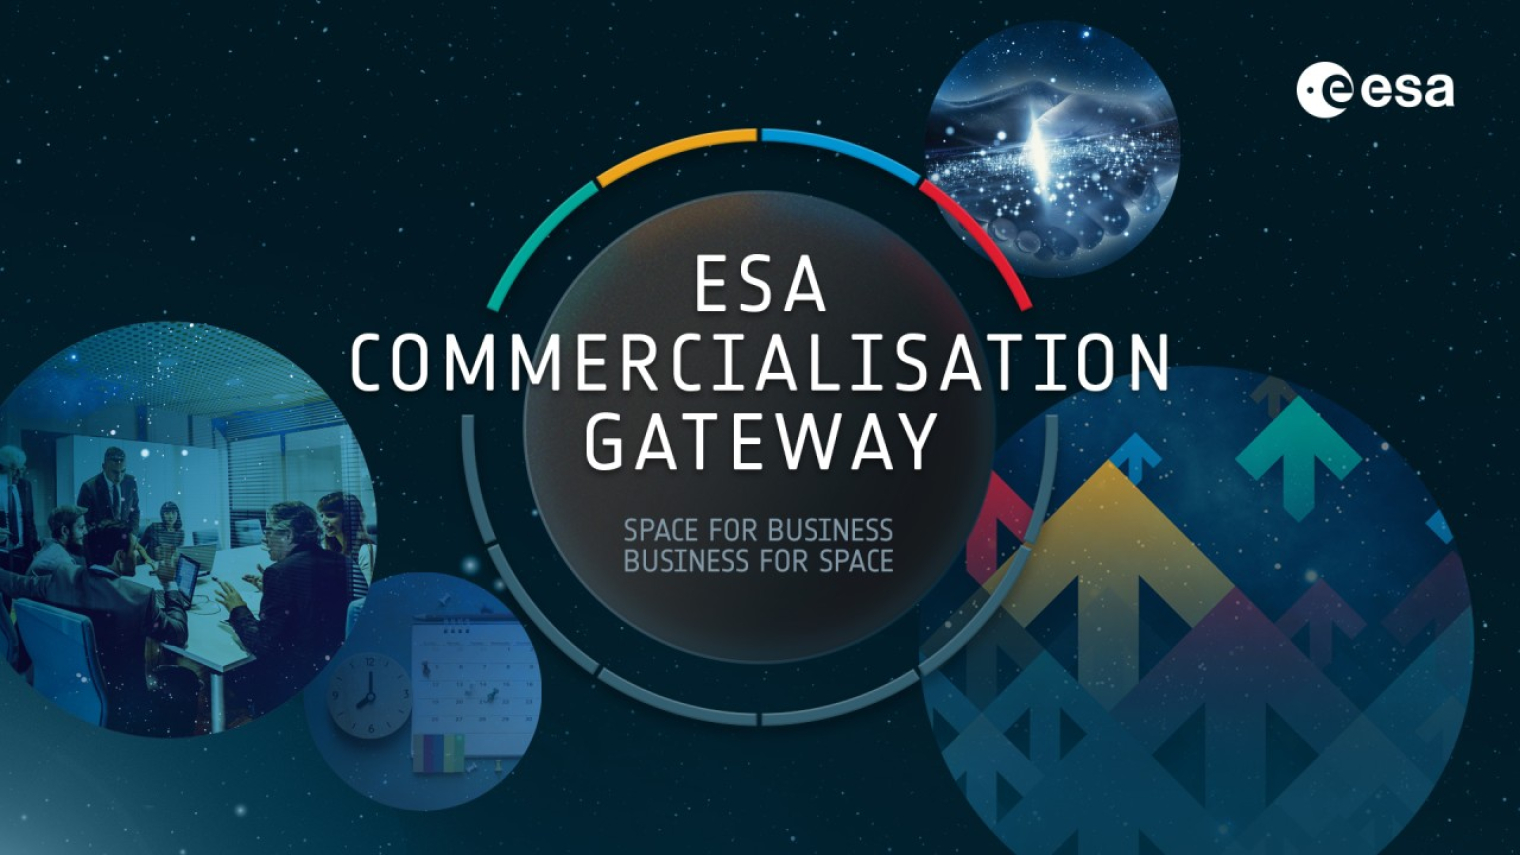 ESA's Commercialisation Gateway spotlights Spacemanic's journey and cutting-edge nanosatellite project